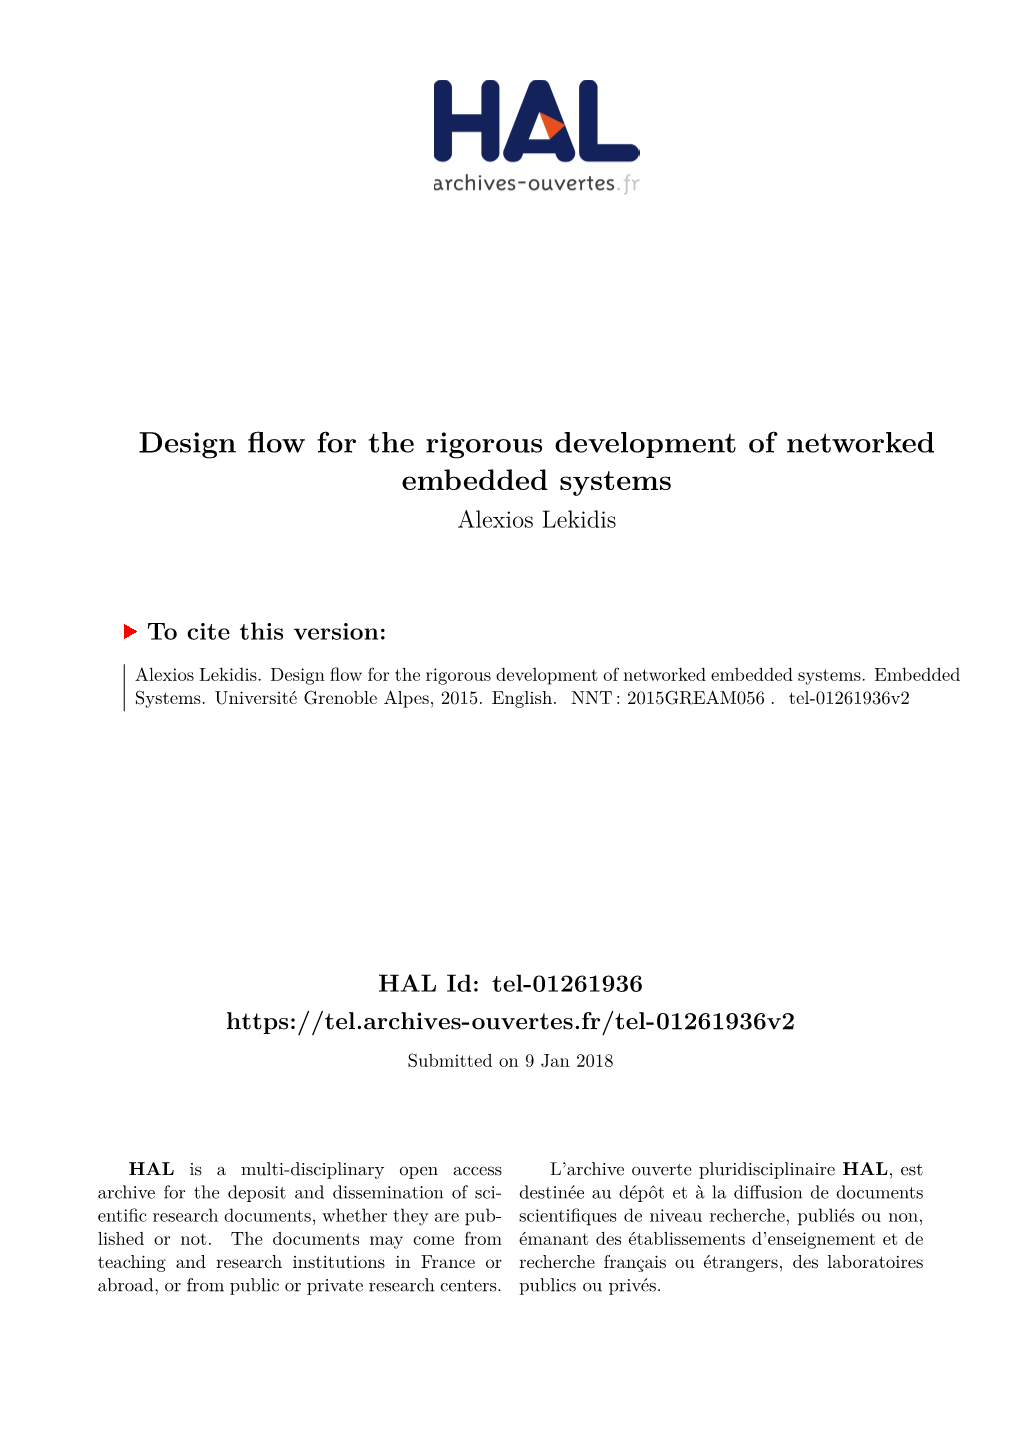 Design Flow for the Rigorous Development of Networked Embedded Systems Alexios Lekidis